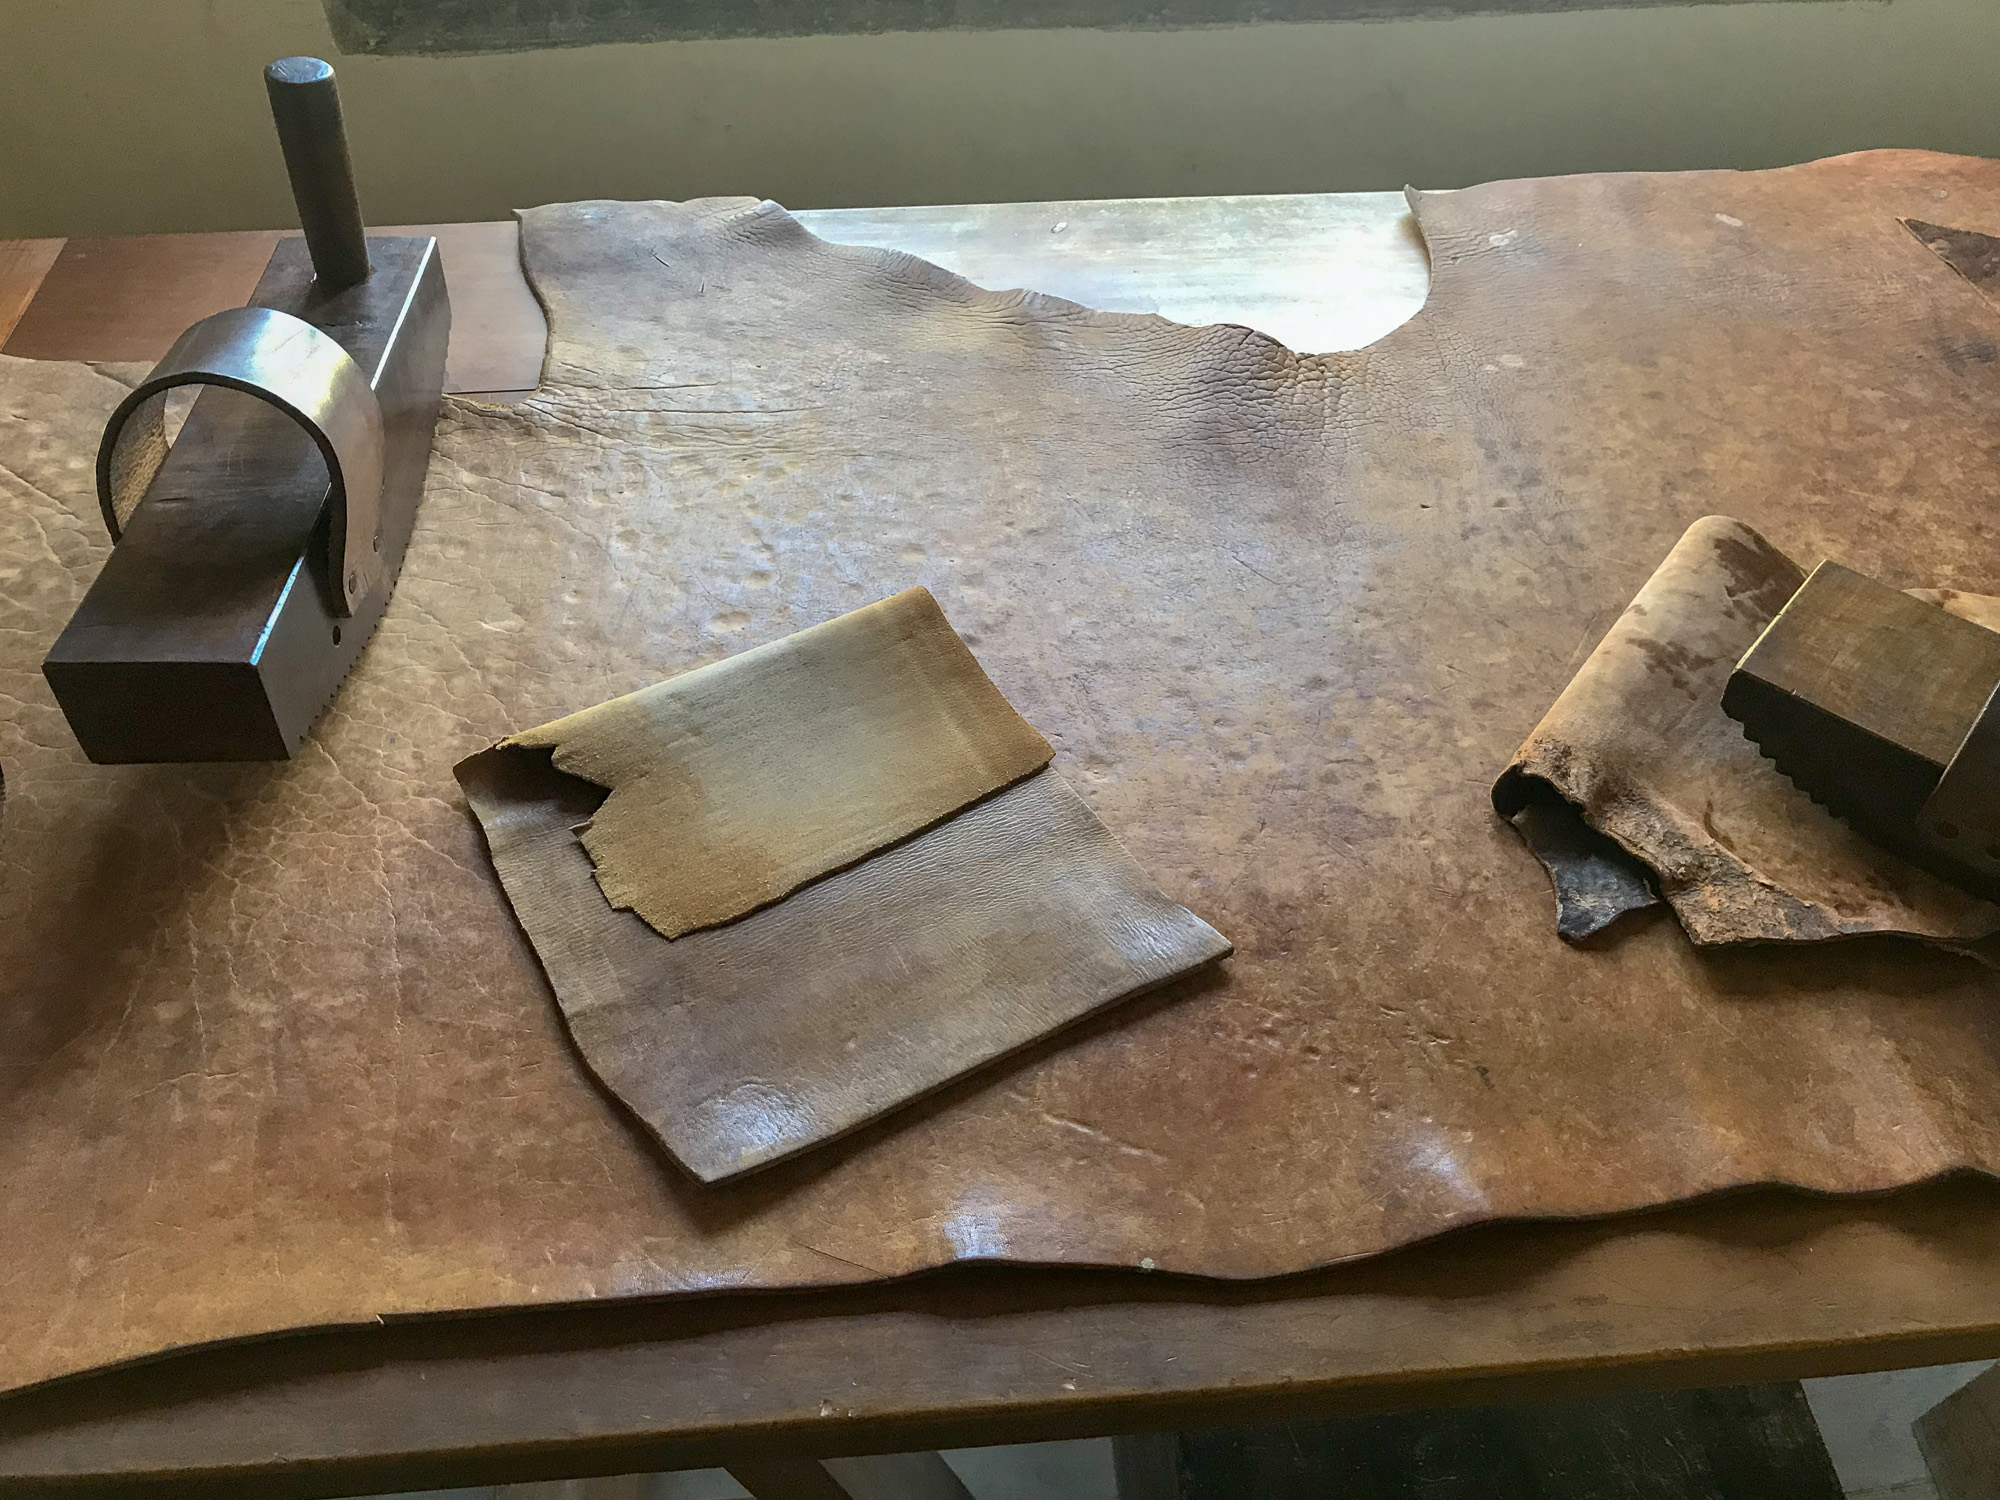 Materials to leather bind books